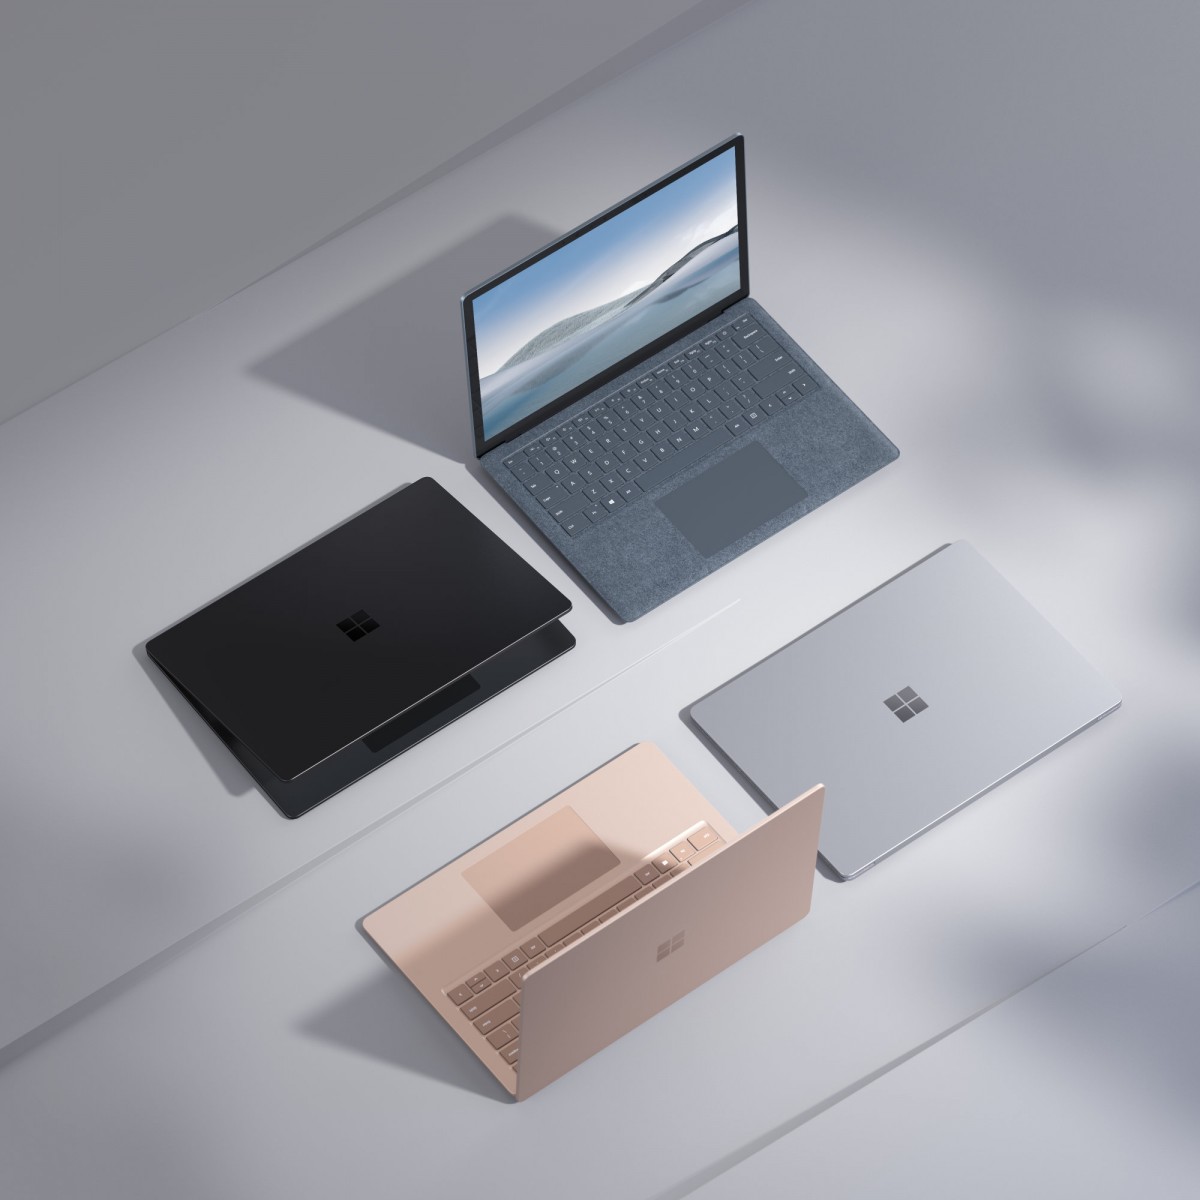 Microsoft announces Surface Laptop 4 with AMD and Intel processors